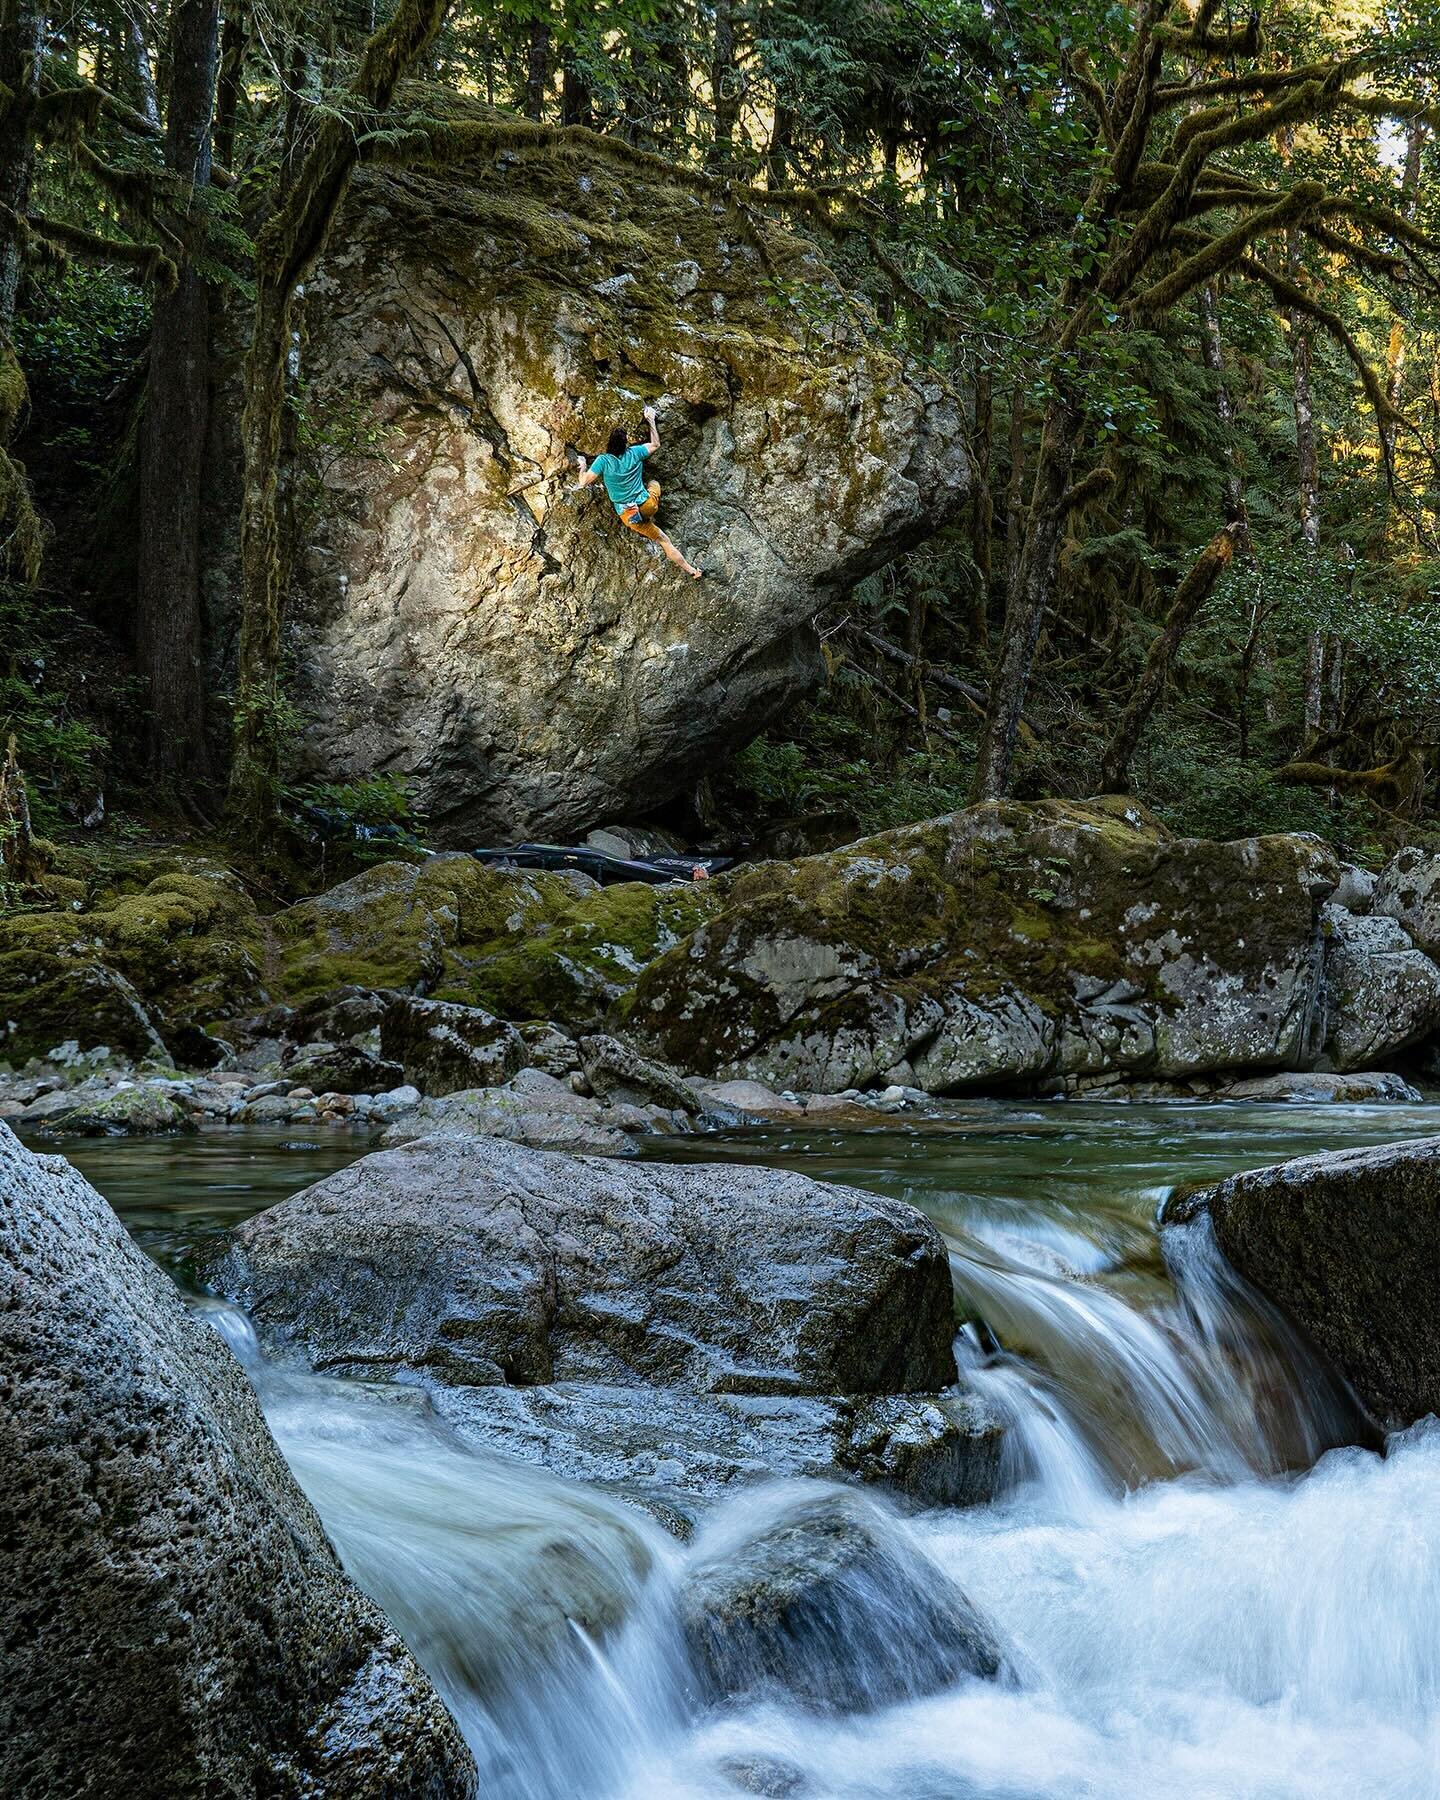 To say that Whispering Waters is a beautiful boulder problem would not do it justice. It is a name that resonates with awe and admiration among bouldering enthusiasts in Squamish. In fact, this remarkable climb holds a prominent place in the current 